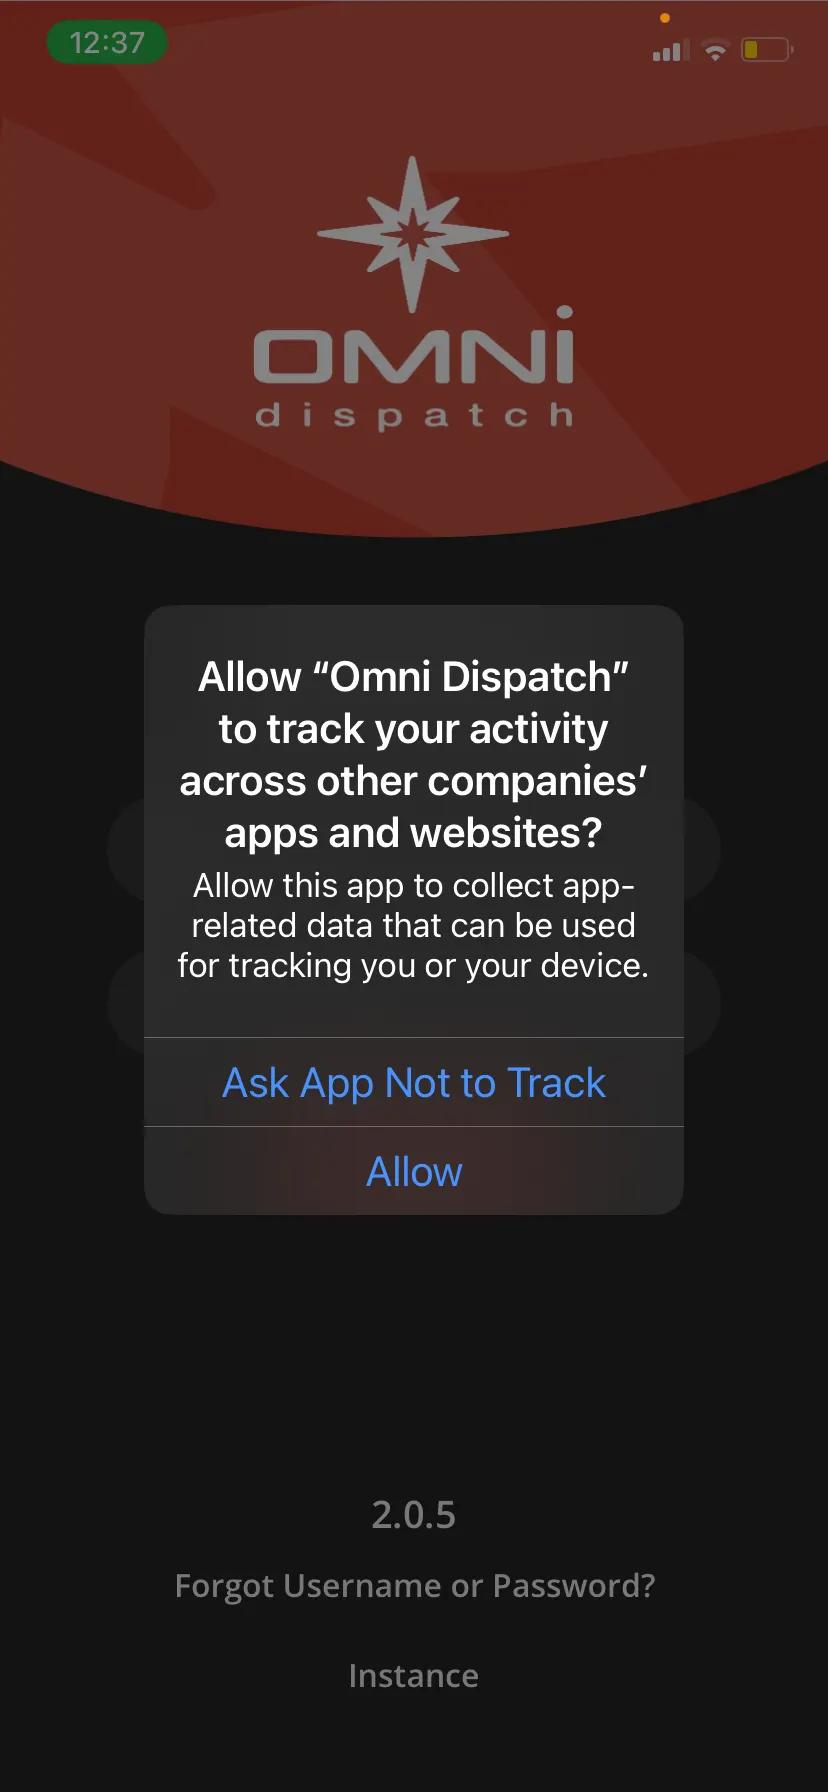 When asked to allow Omni Dispatch to track your activity across other companies, select Allow.